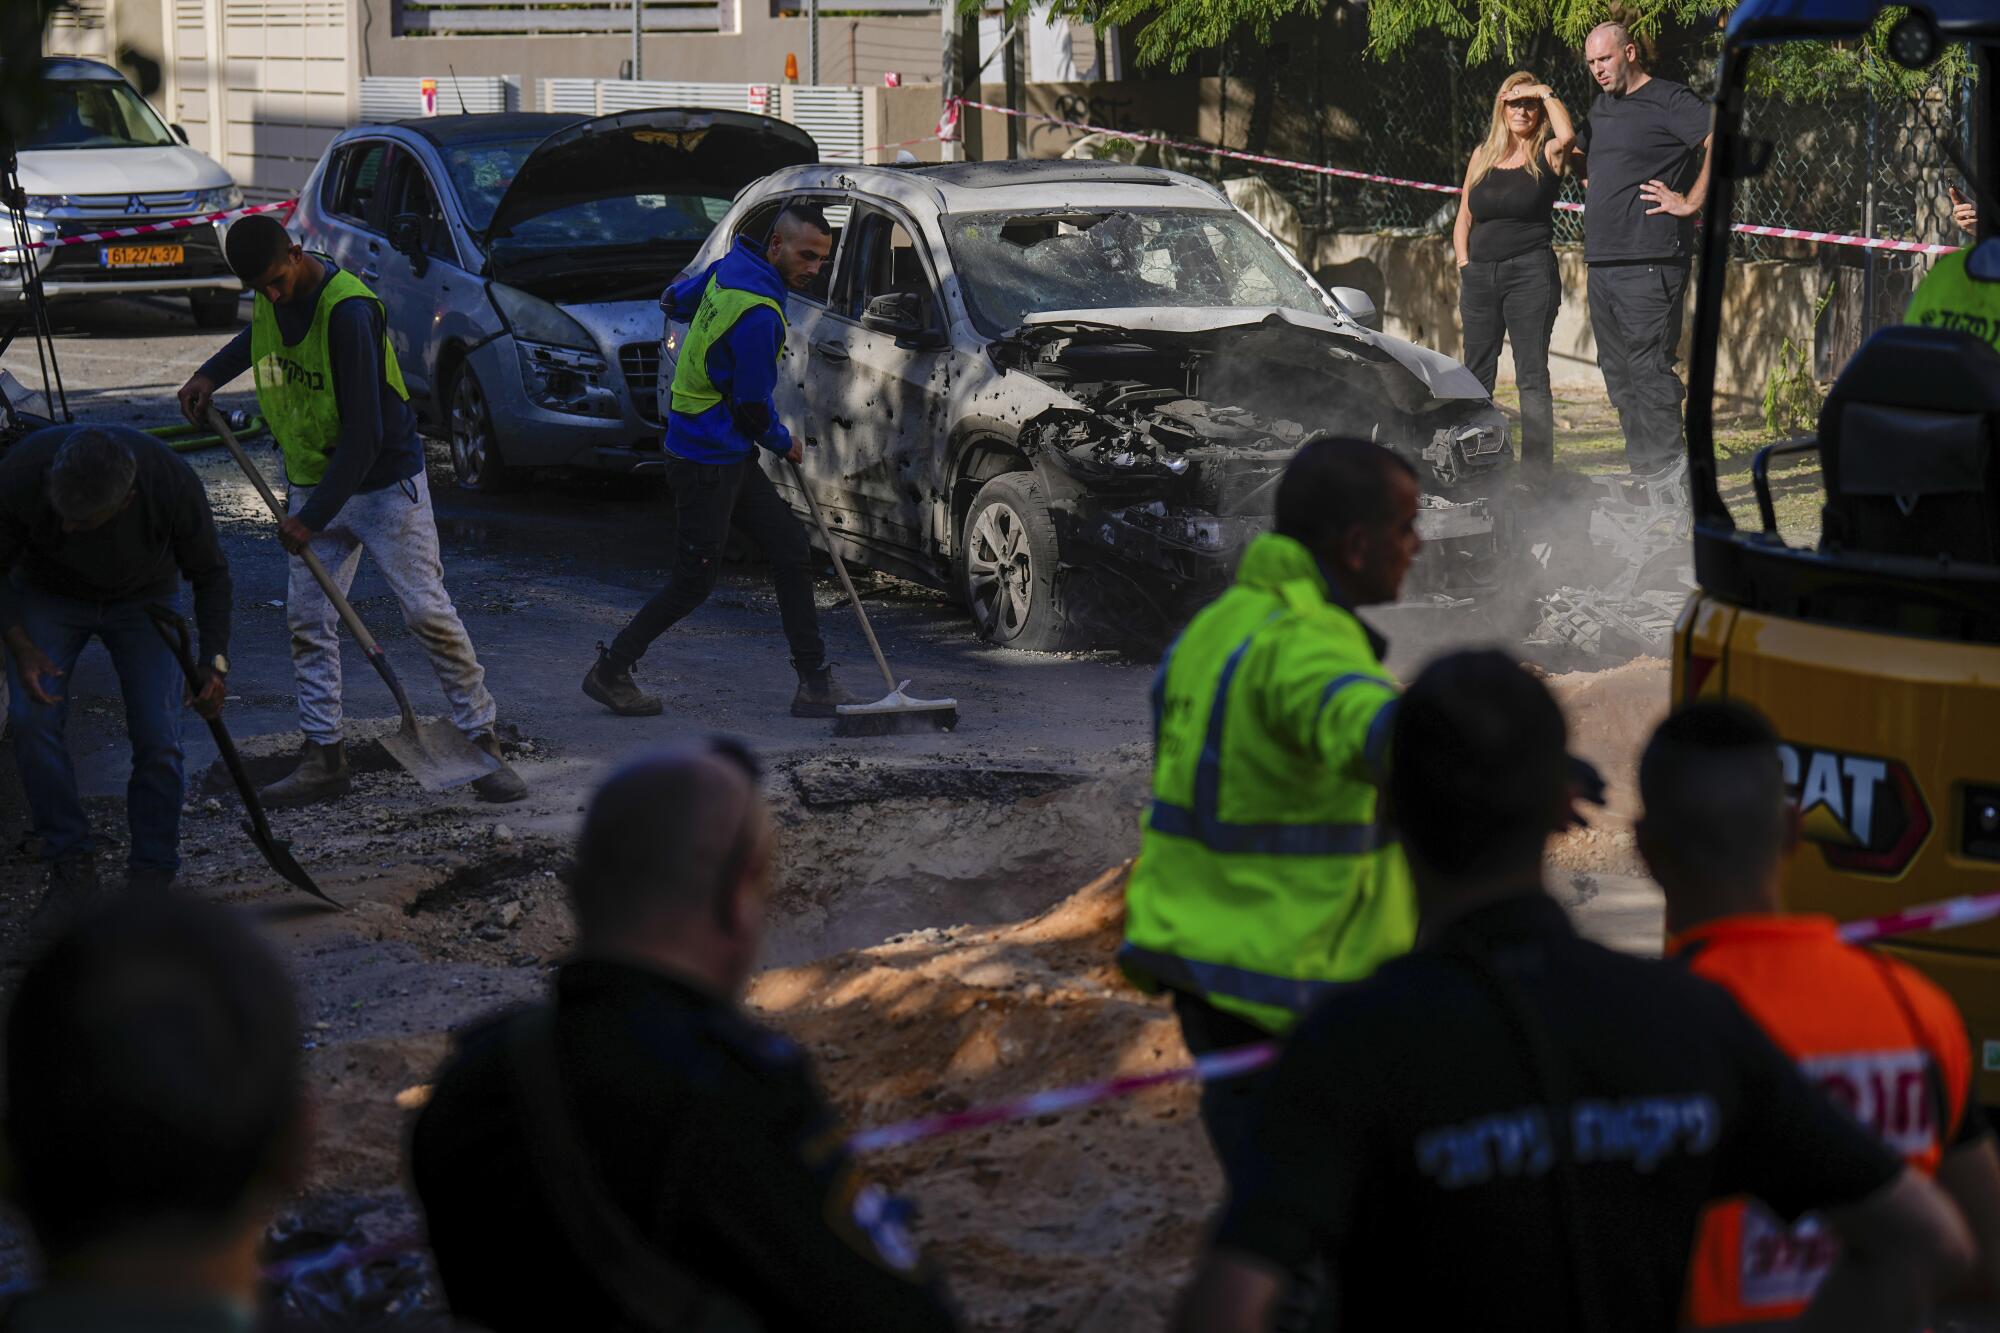 People look at damage to cars and pavement in an Israeli street.